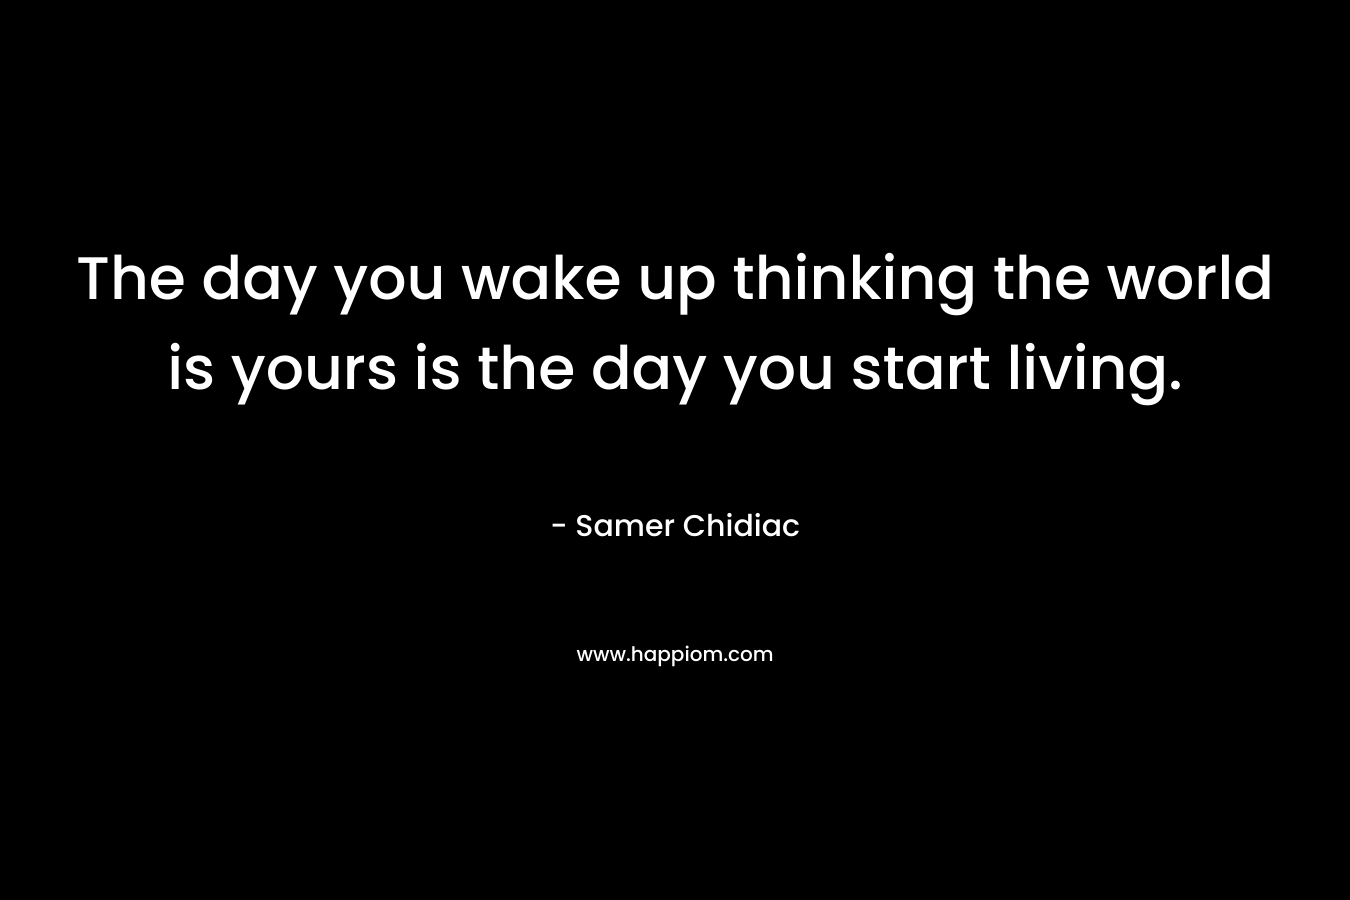 The day you wake up thinking the world is yours is the day you start living.